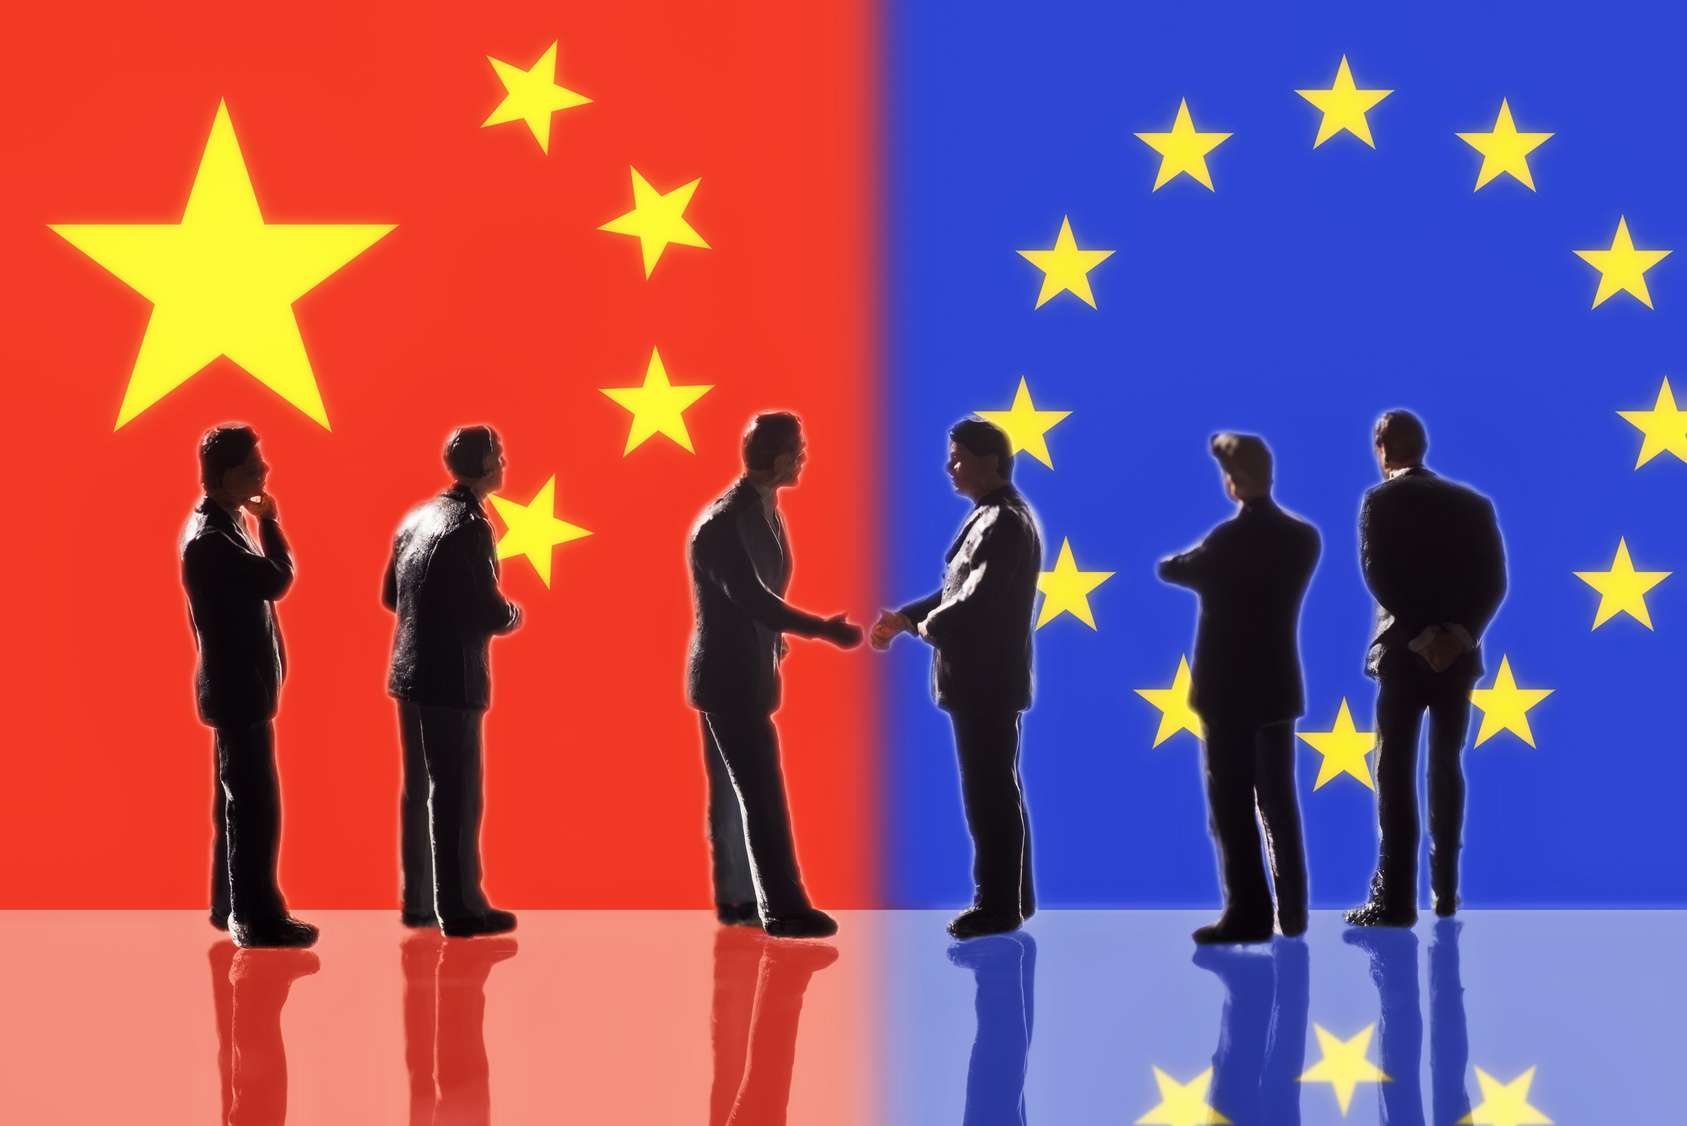 Chineese and european flags, businessmen shake hands on both sides